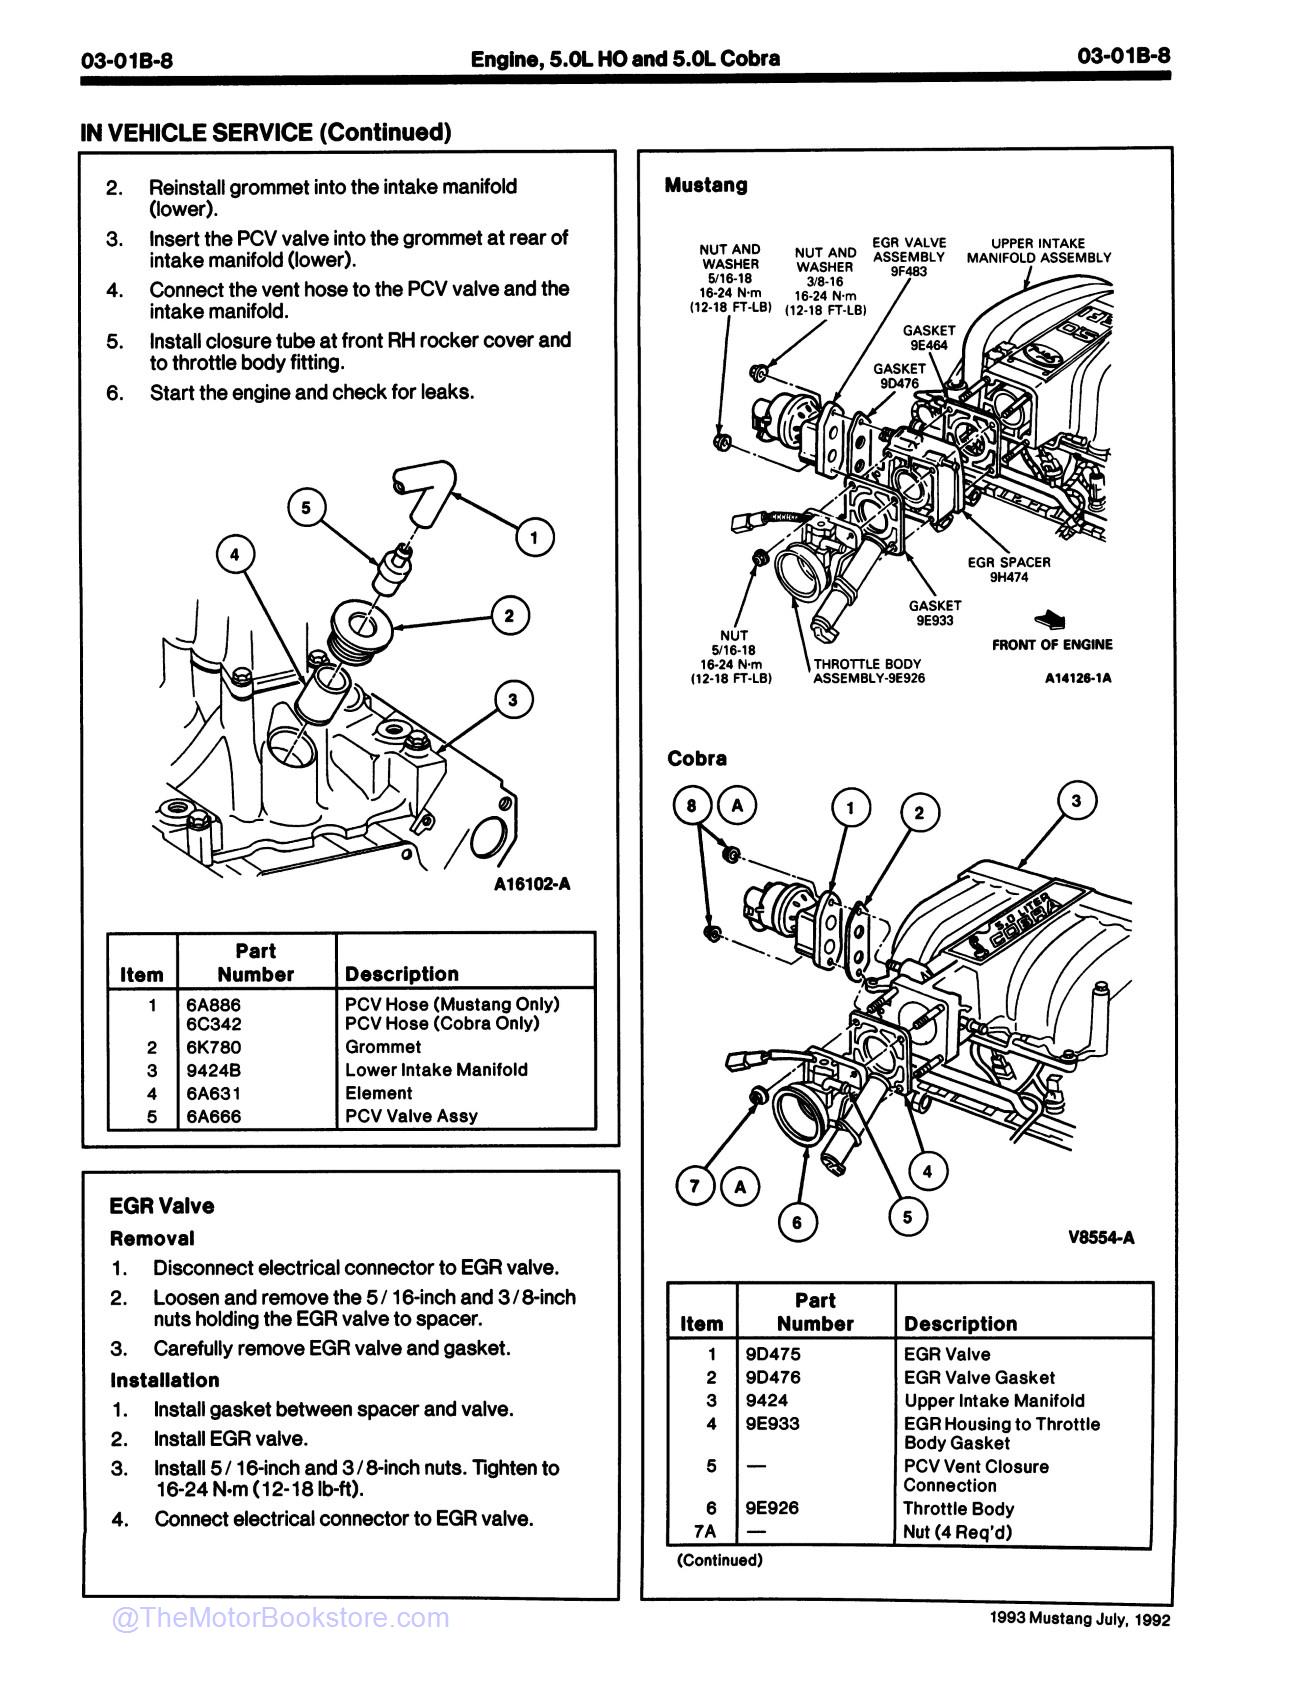 1993 Ford Mustang Service Manual - Sample Page 1